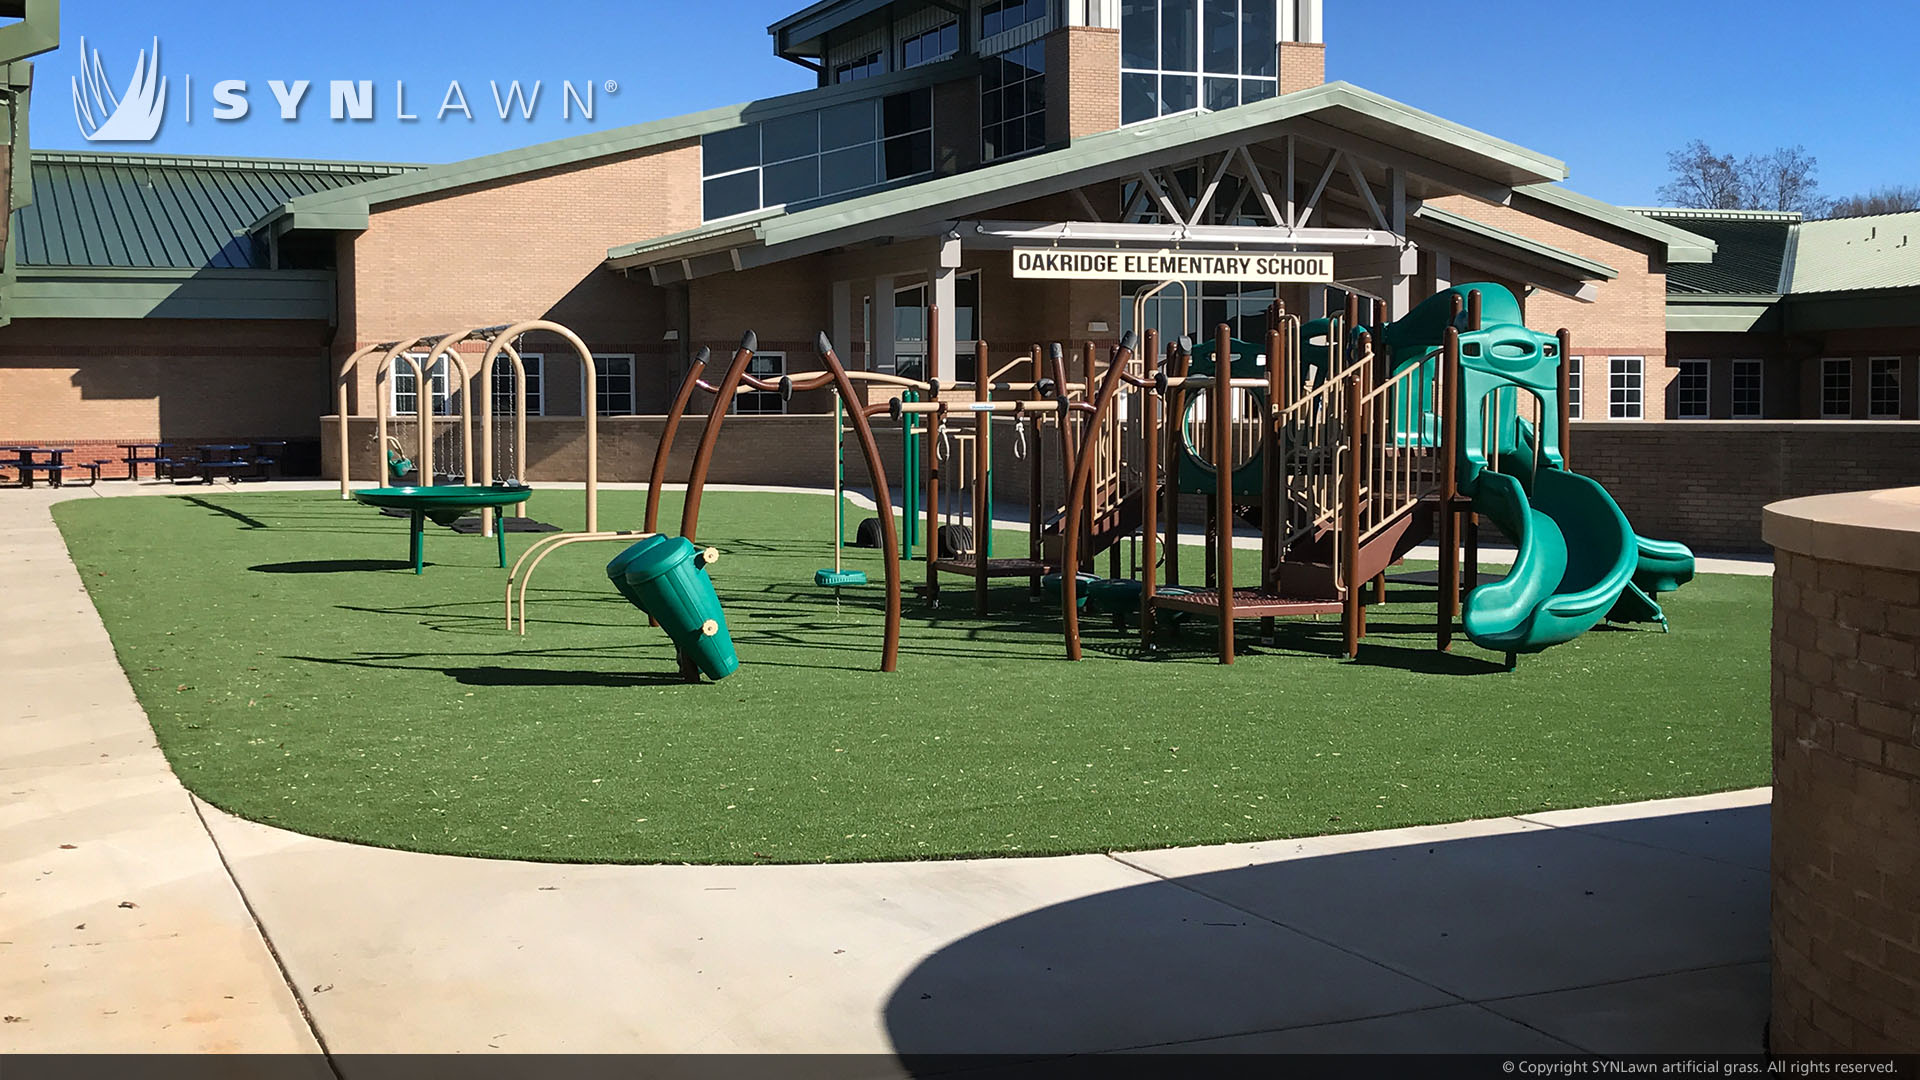 Commercial artificial playground grass installed at elementary school